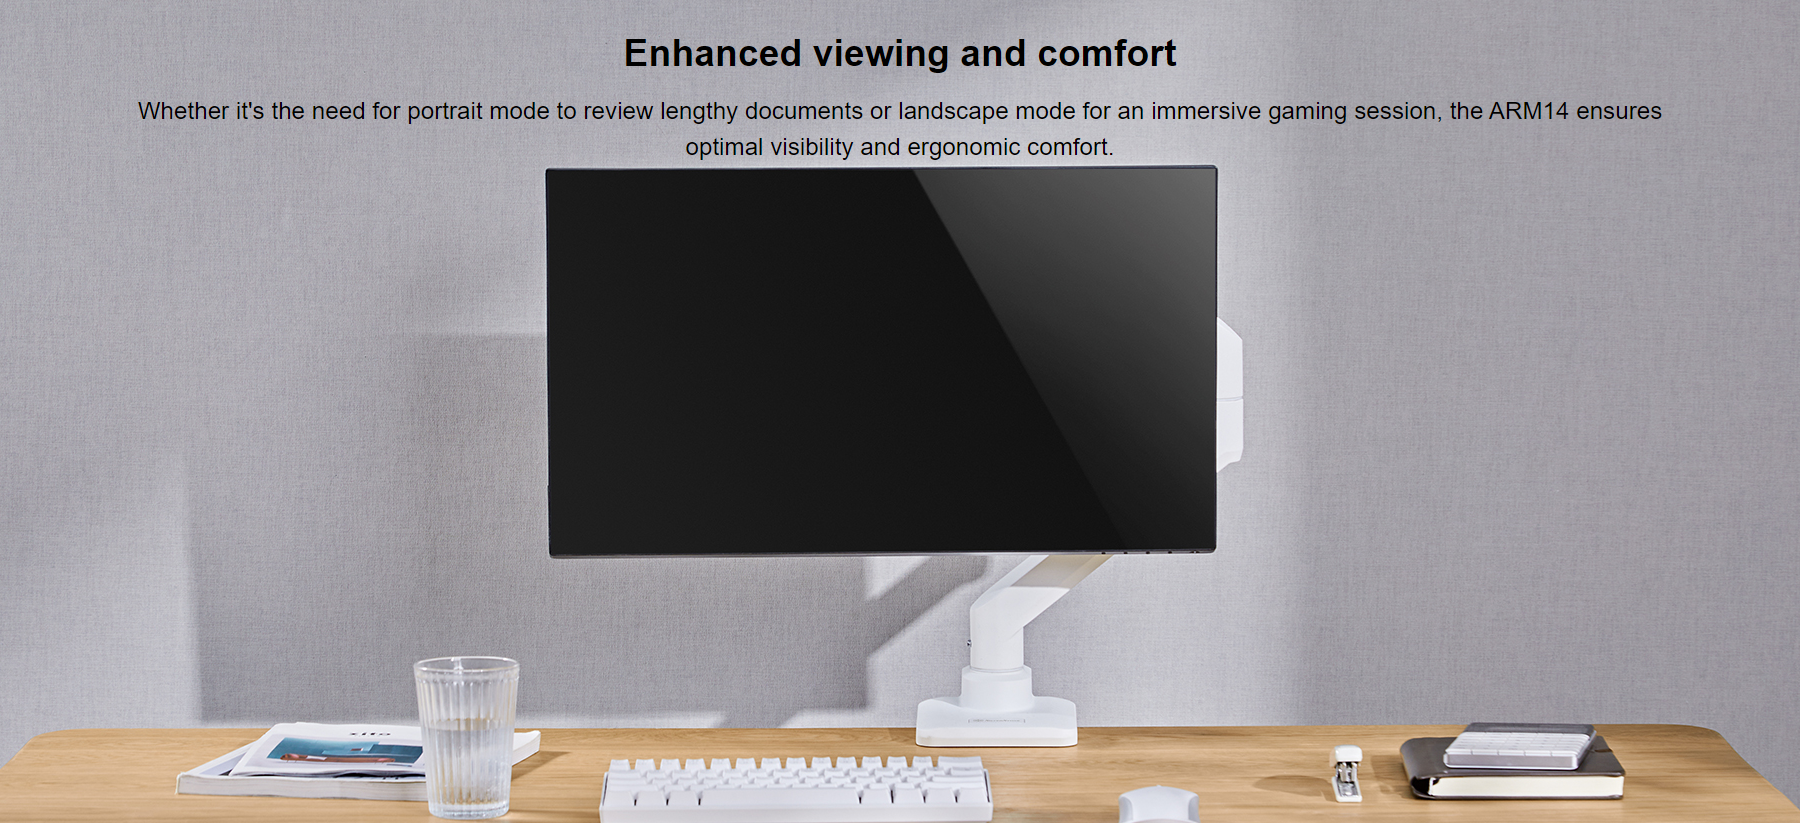 A large marketing image providing additional information about the product SilverStone ARM14 Single Monitor Arm - White - Additional alt info not provided